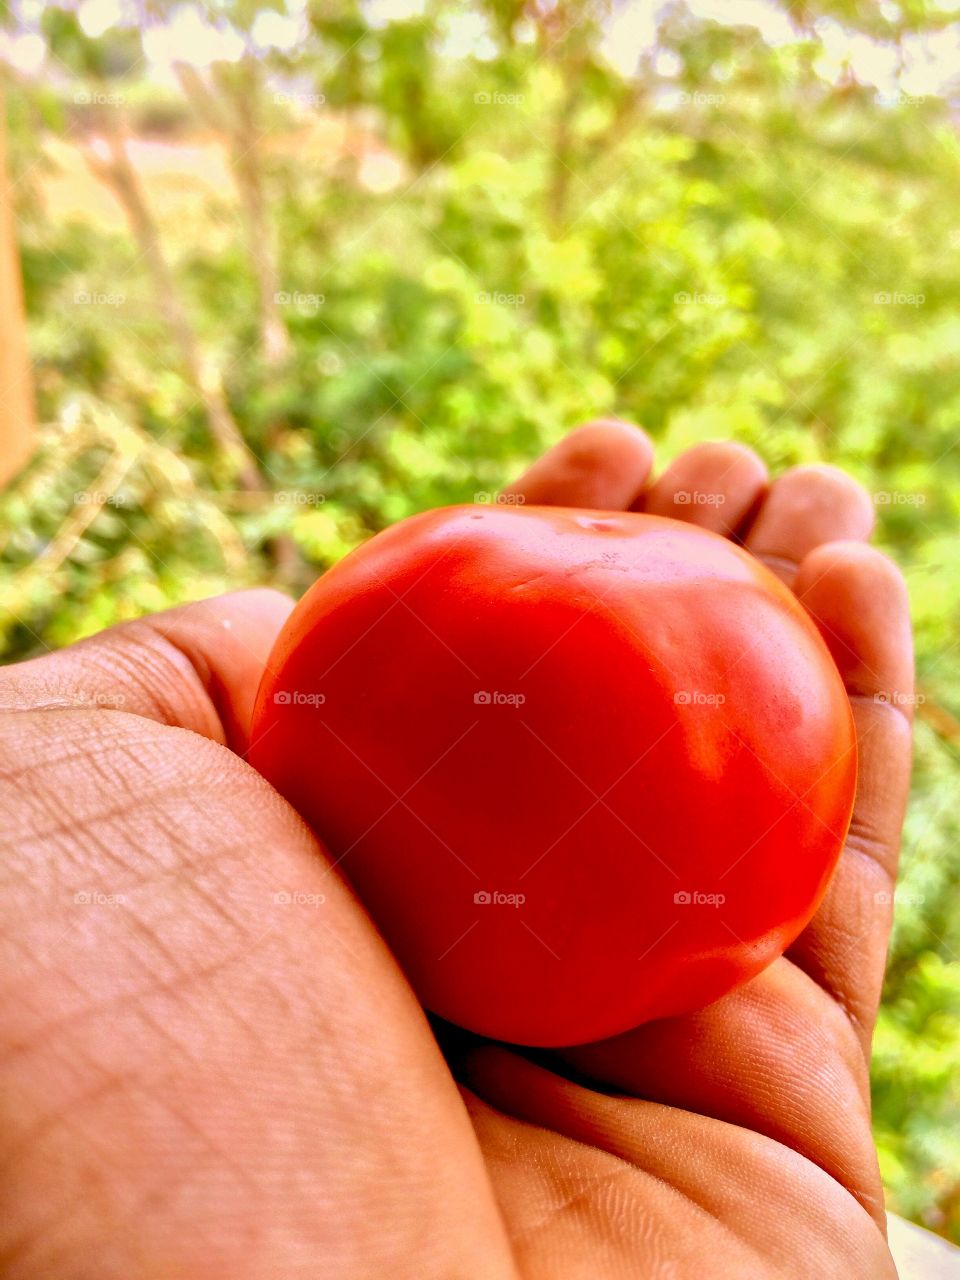 Close-up of a person holding fresh red tomato